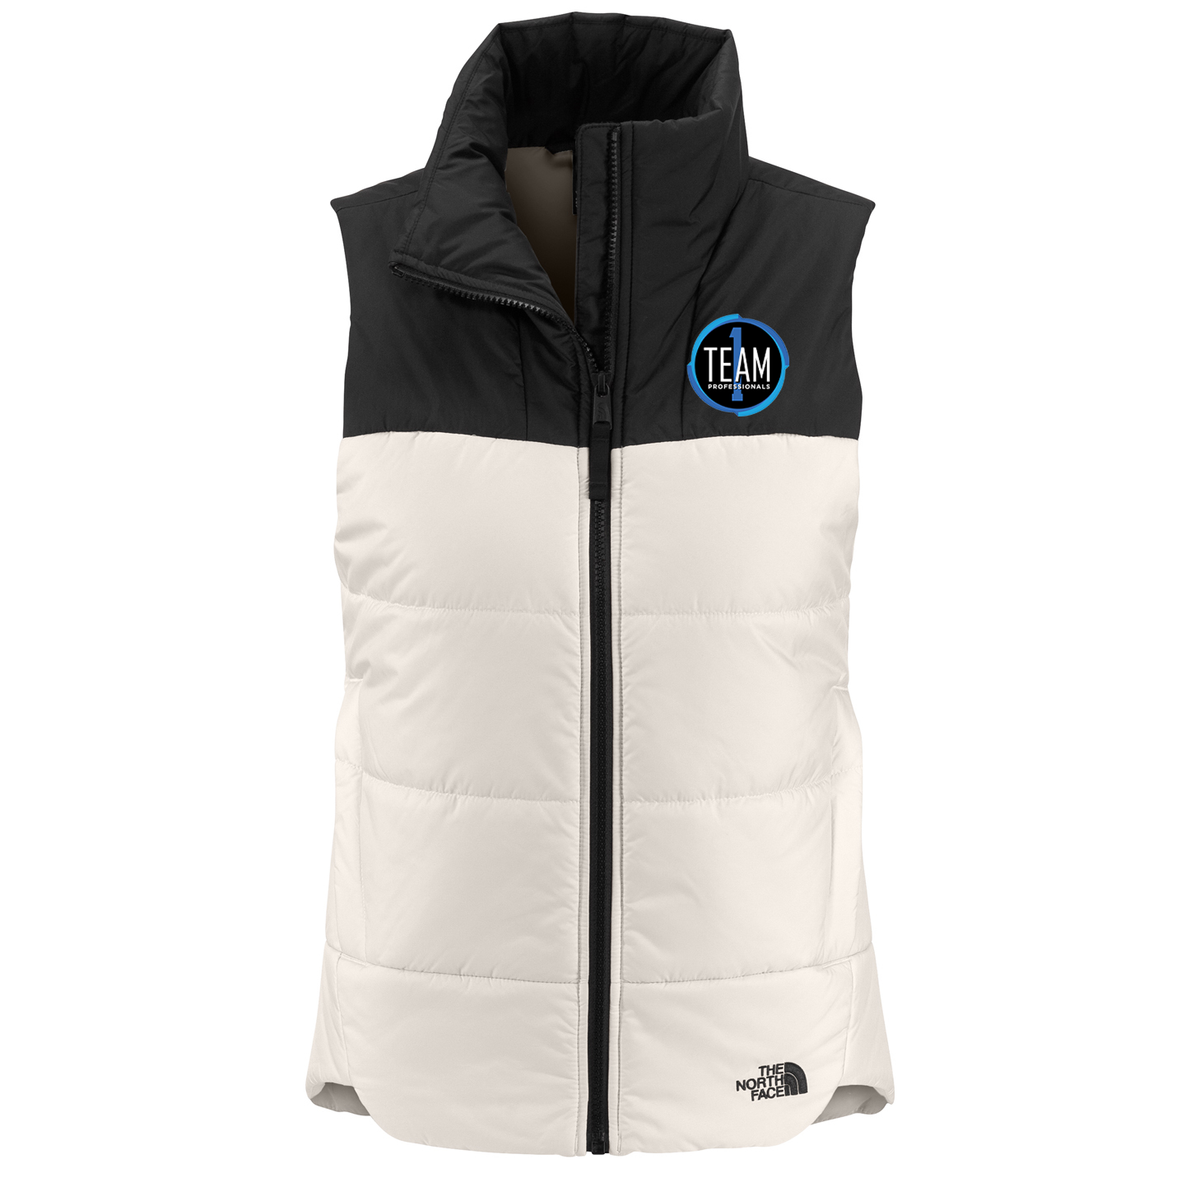 1Team The North Face Ladies Everyday Insulated Vest